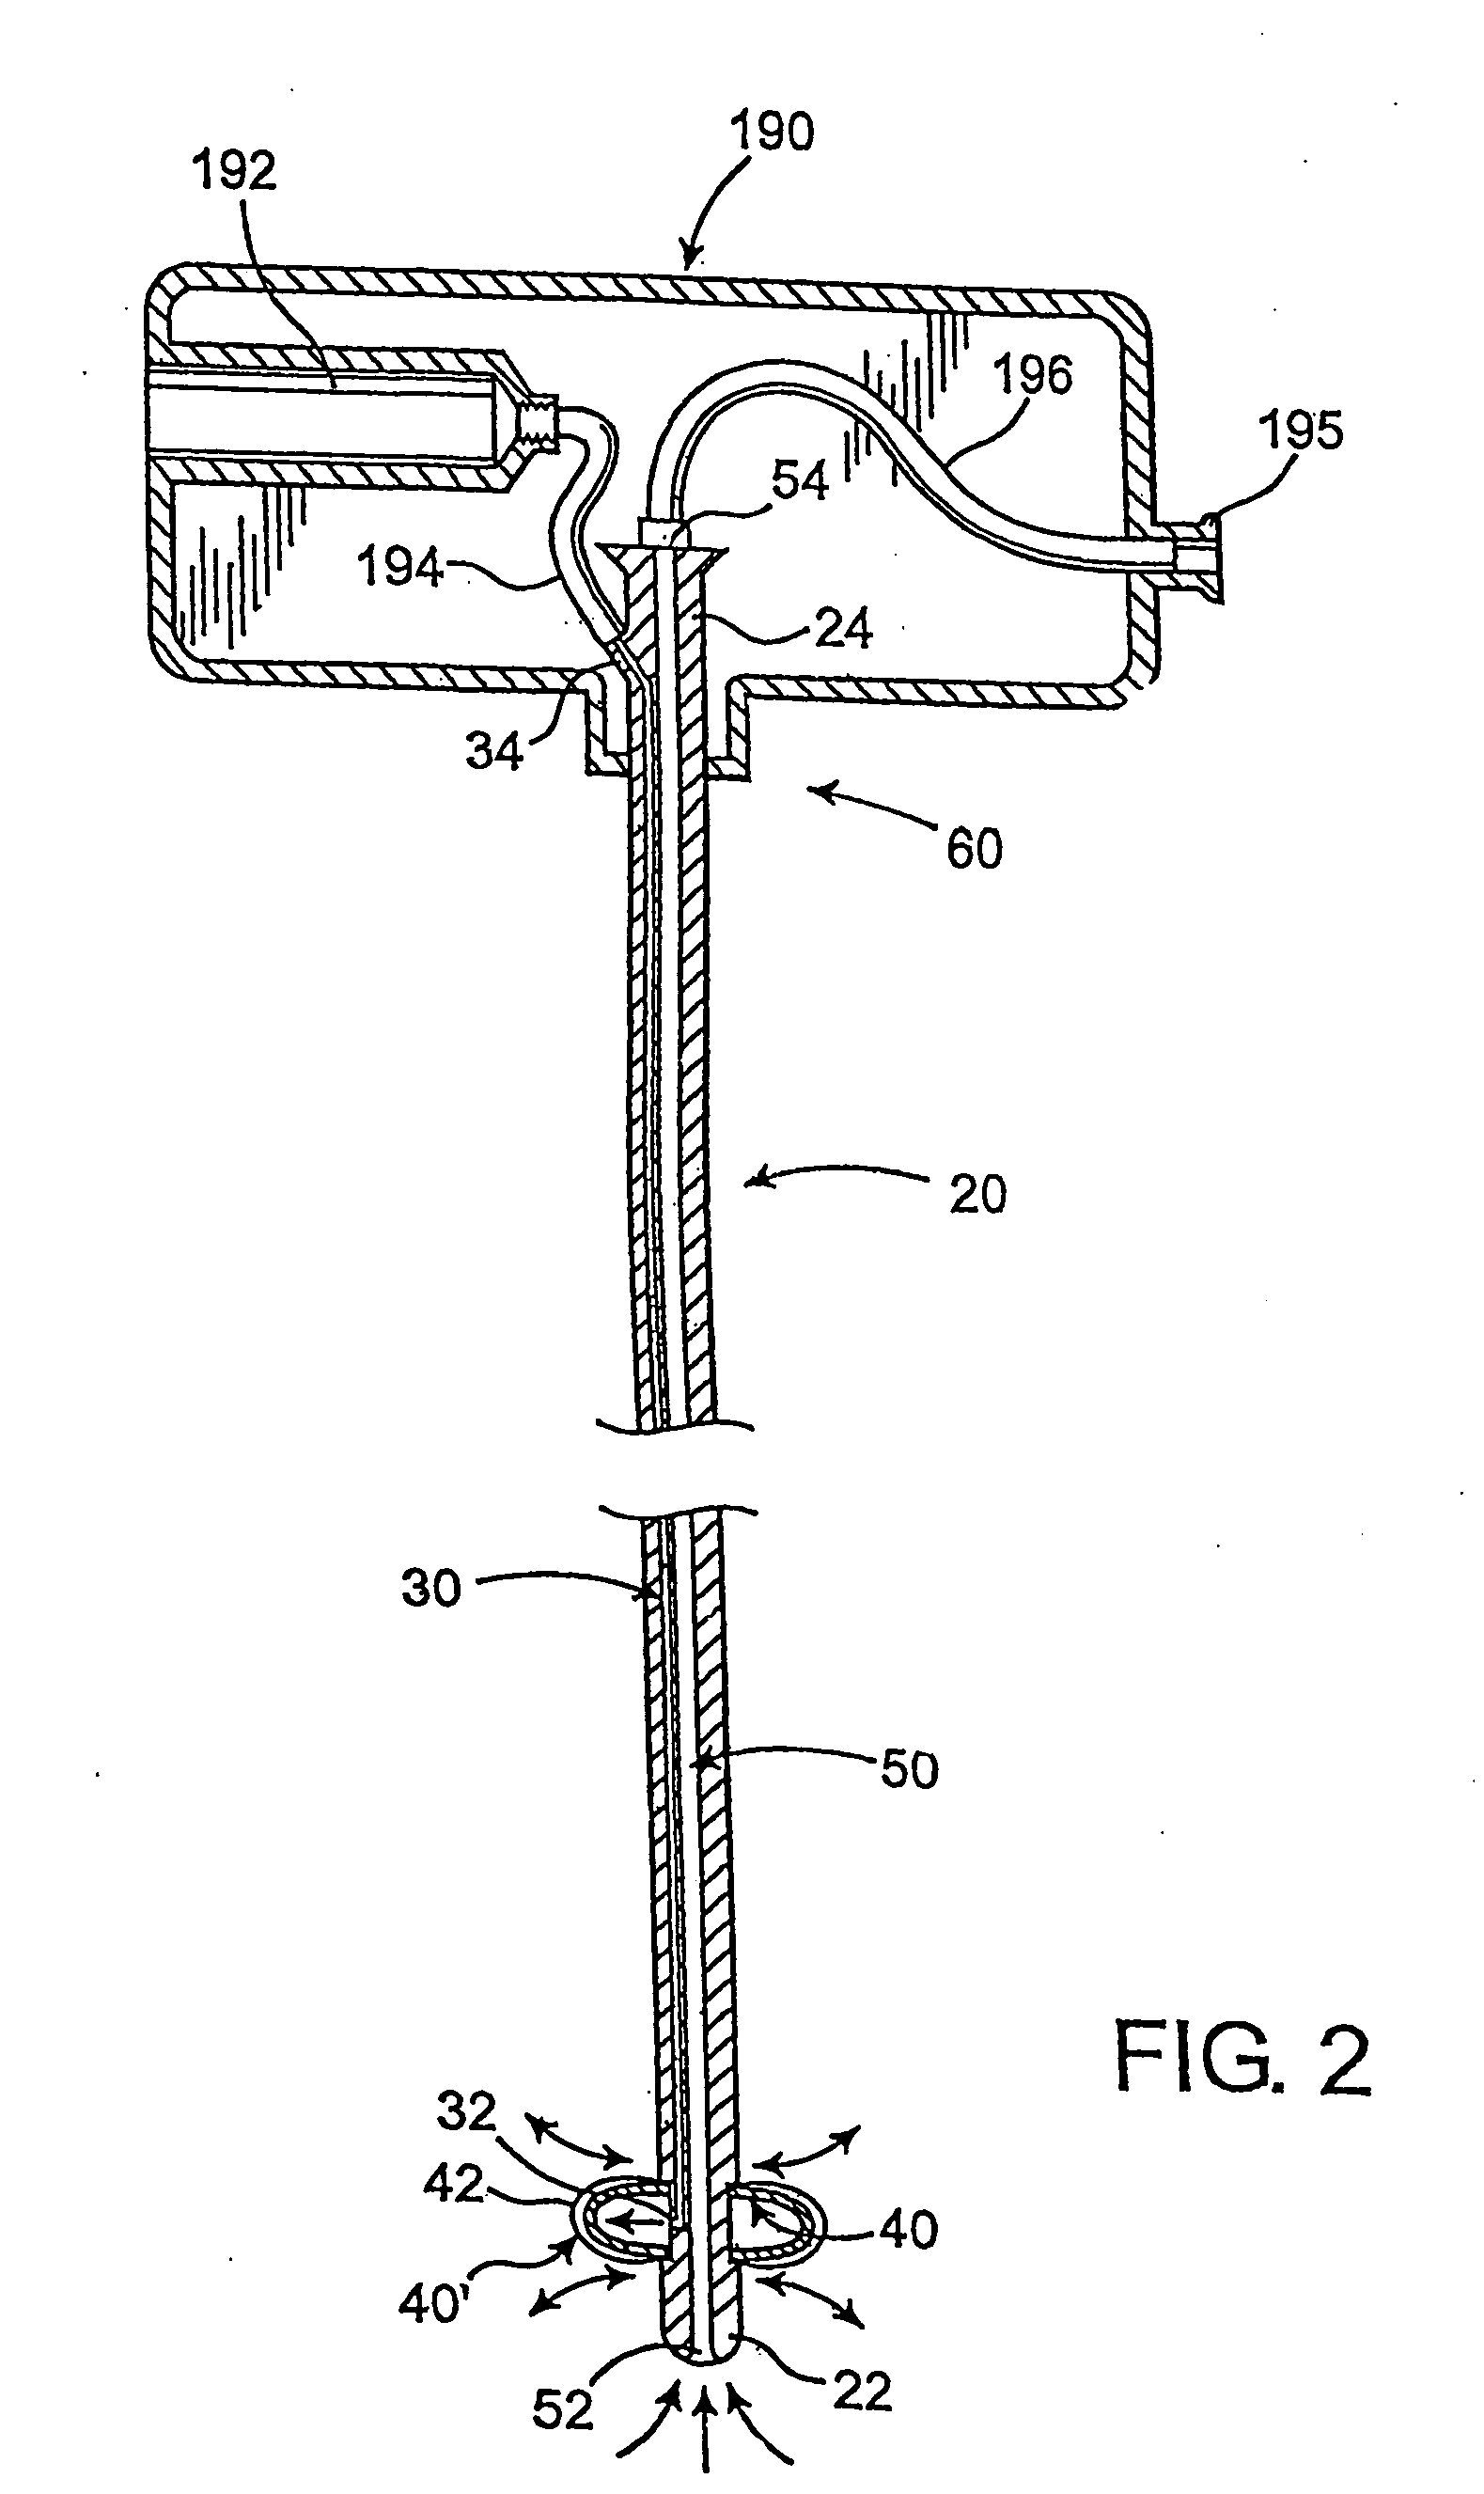 Endotracheal tube cleaning apparatus